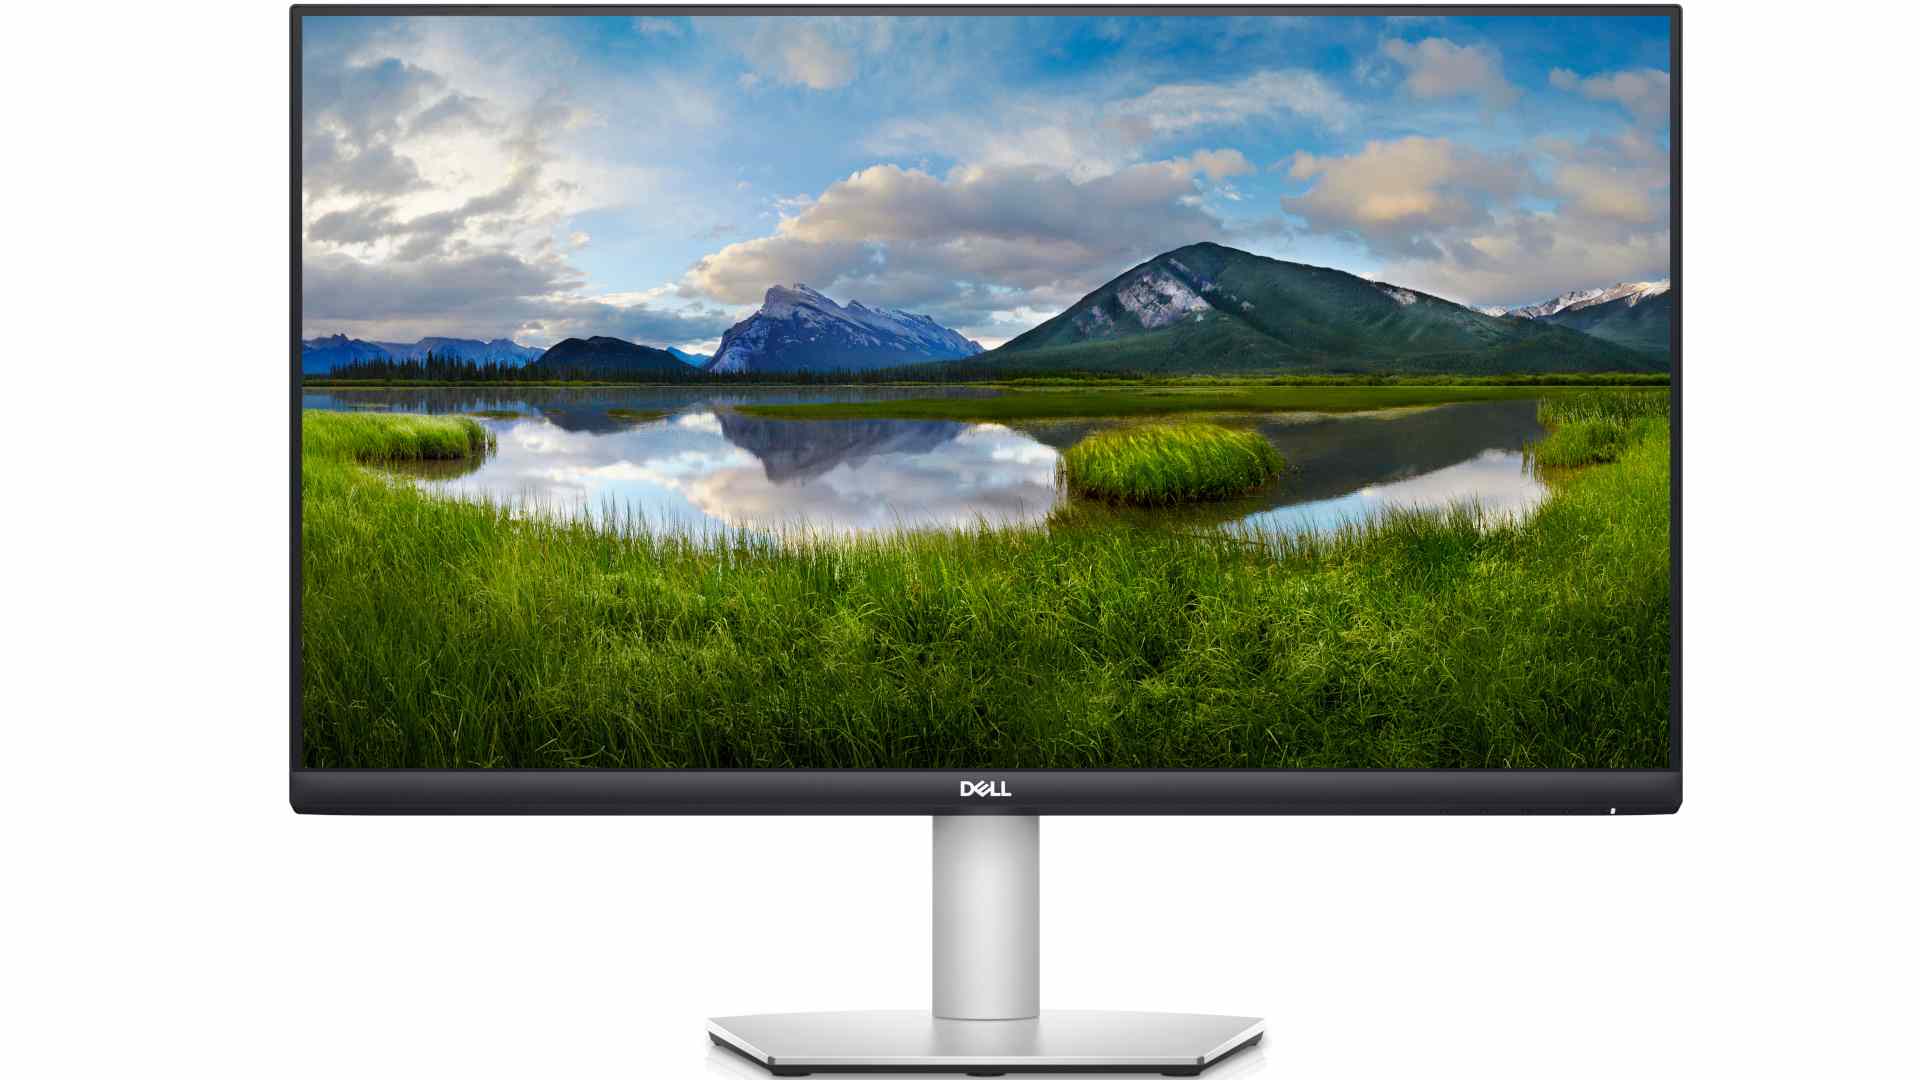 DELL S2721QS 27 Inch IPS Monitor 2